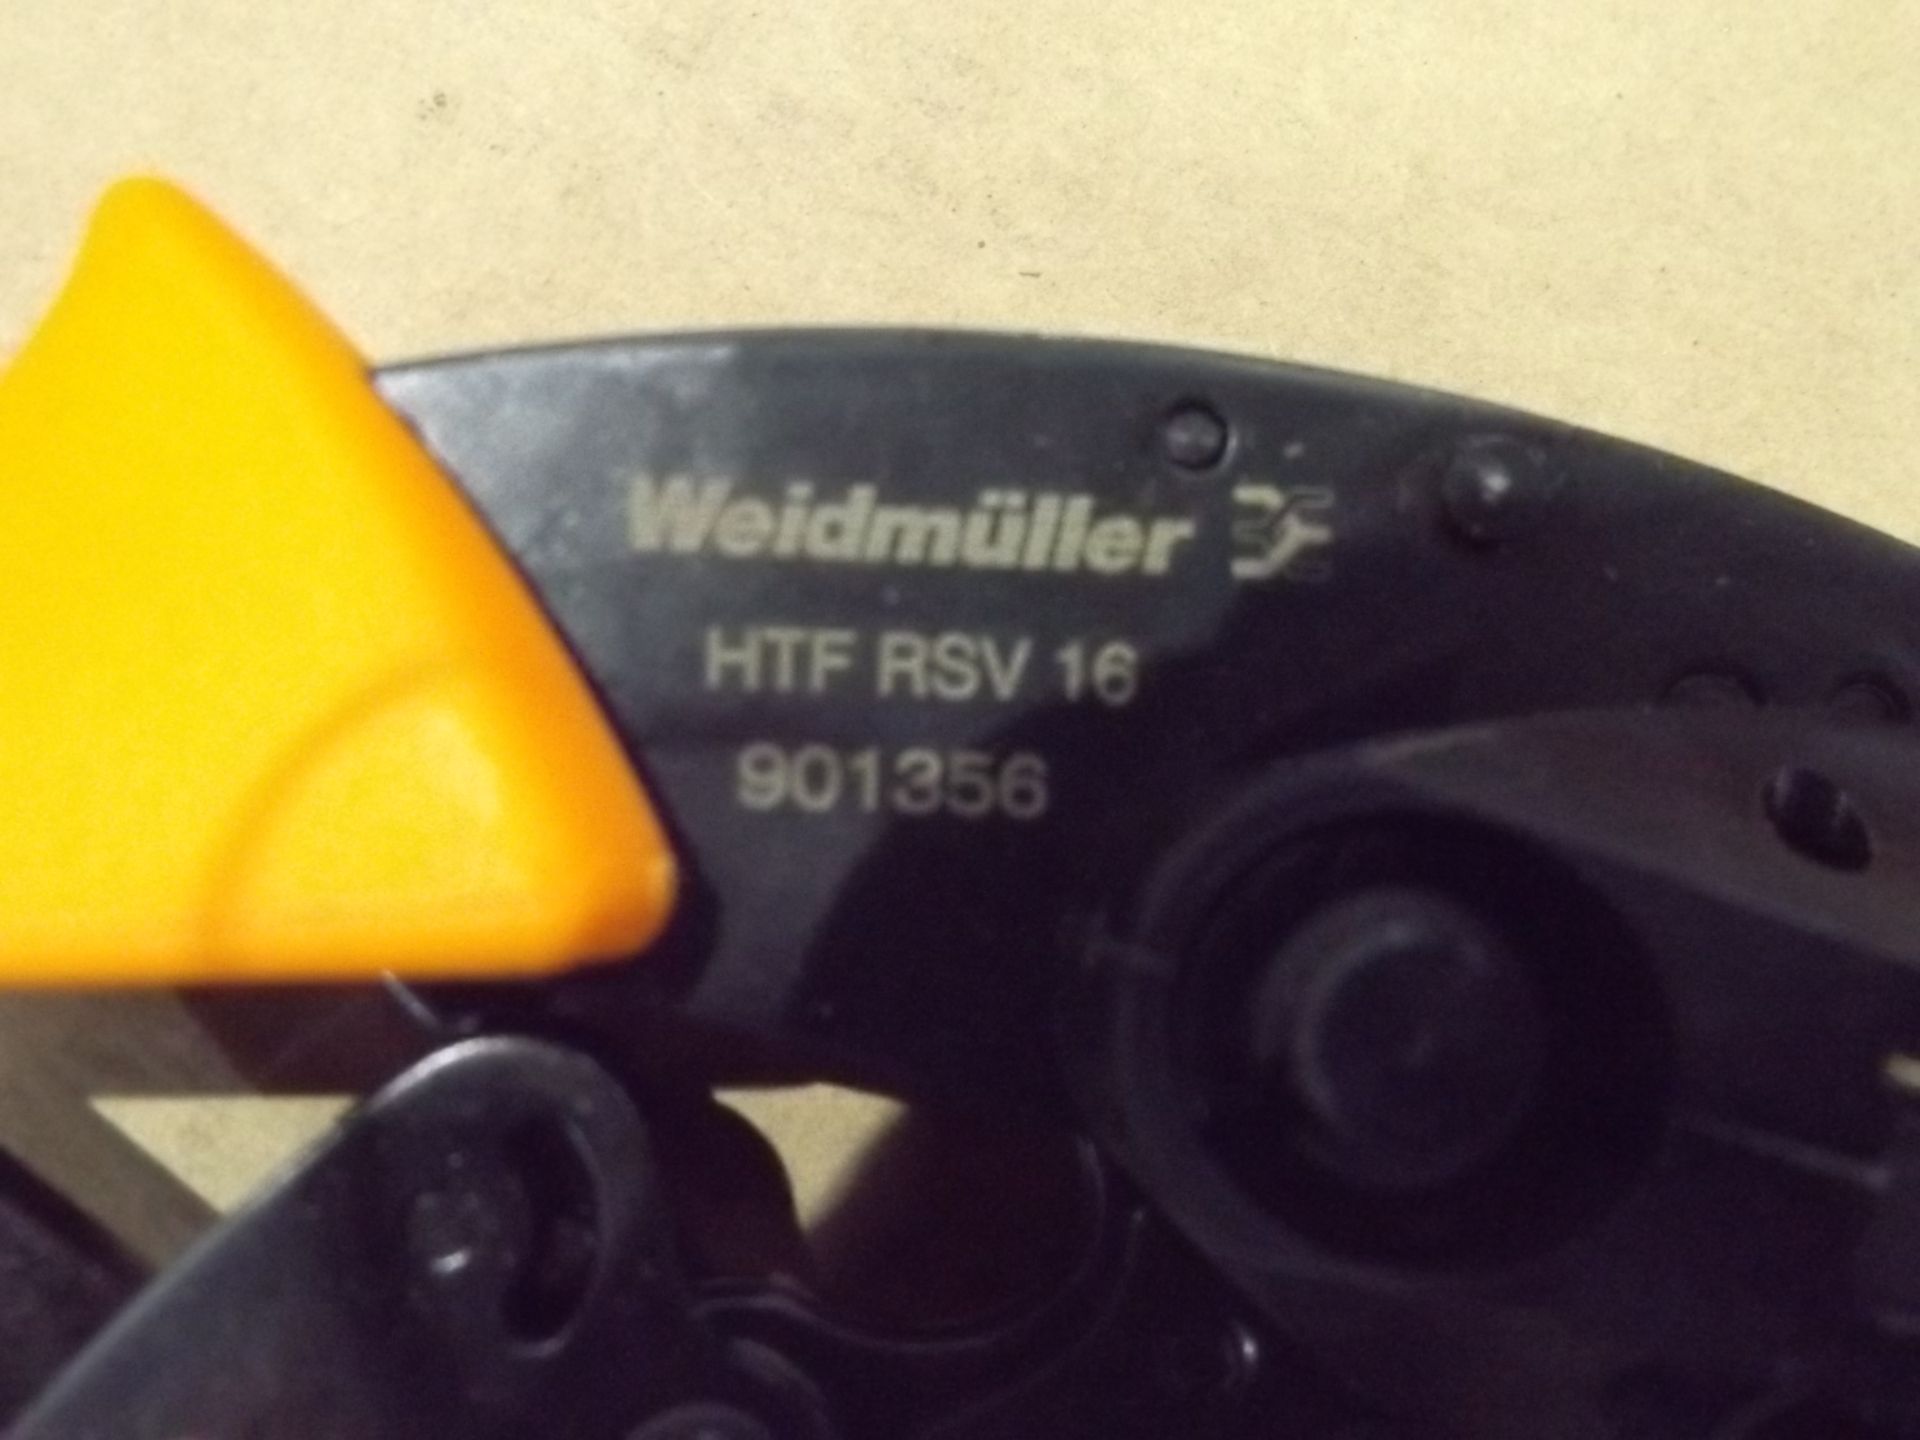 5 x Weidmuller HTF RSV 16 Crimping Tools - Image 6 of 6